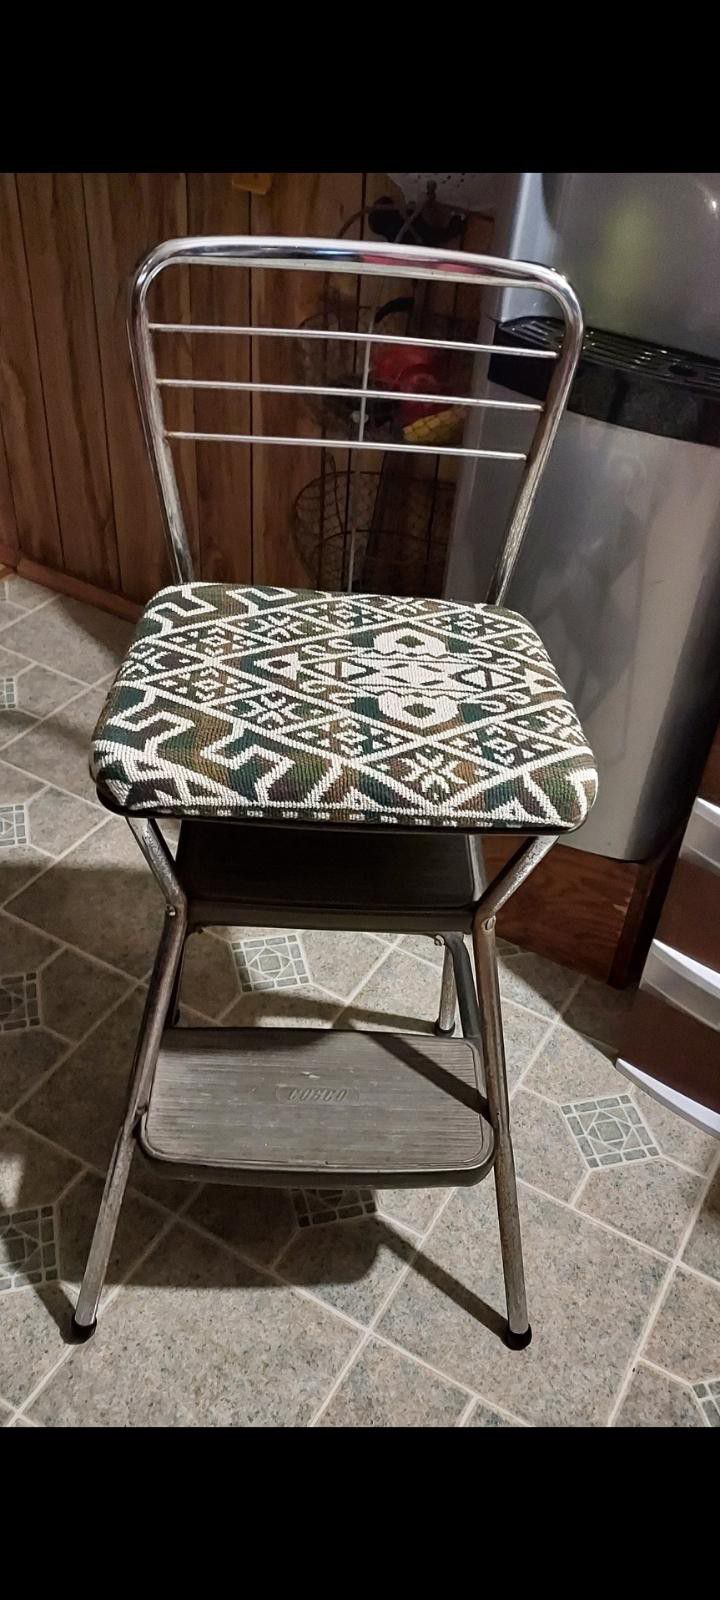 24" Vintage Cosco Styaire Retro Chair / Step Stool, 50.